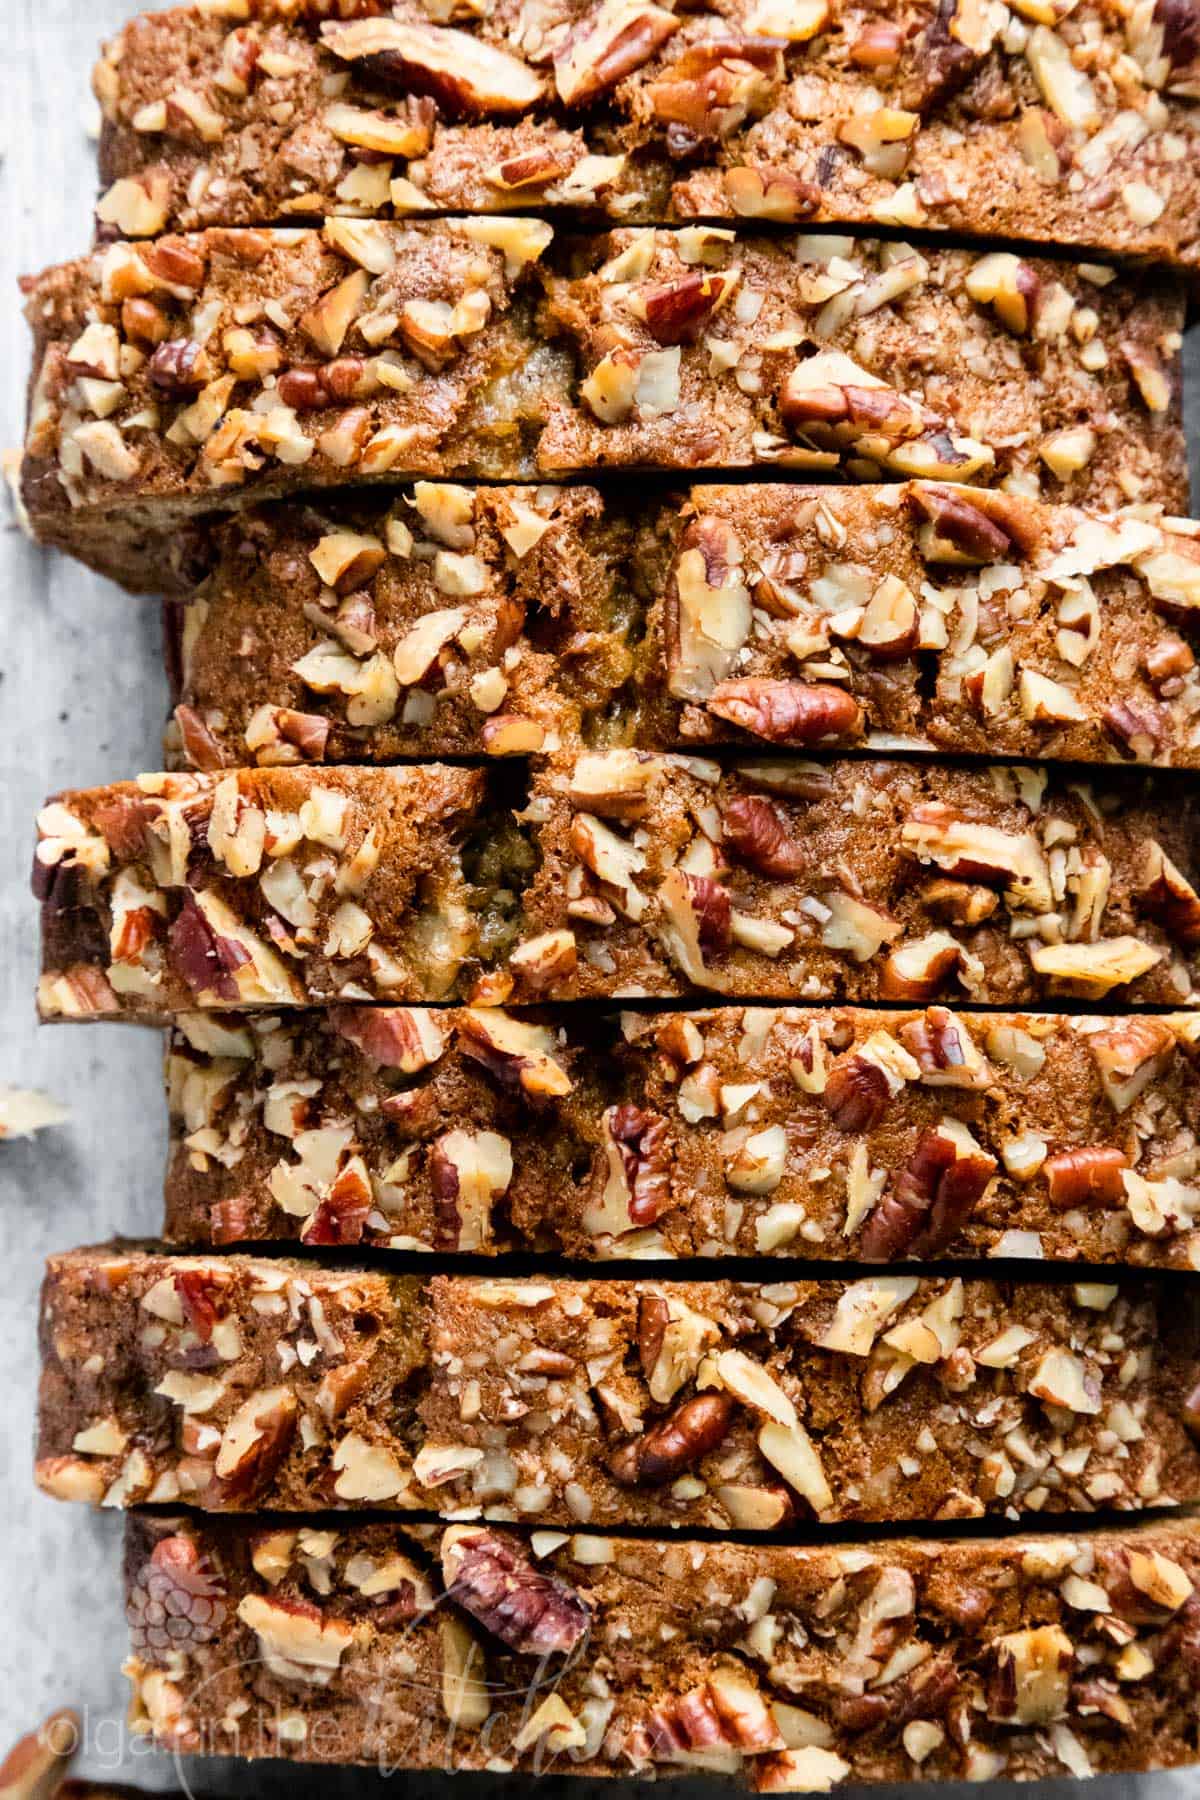 This super-moist Banana Nut Bread Recipe is loaded with bananas, pecans and incredibly soft crumb. It is simple to make and a great way to use those overripe bananas. This moist banana nut bread is so easy and makes a great breakfast on-the-go. #banananutbread #moistbananabread #bananabread #banananutbreadrecipe #bananabreadrecipe #nutbread #olgainthekitchen